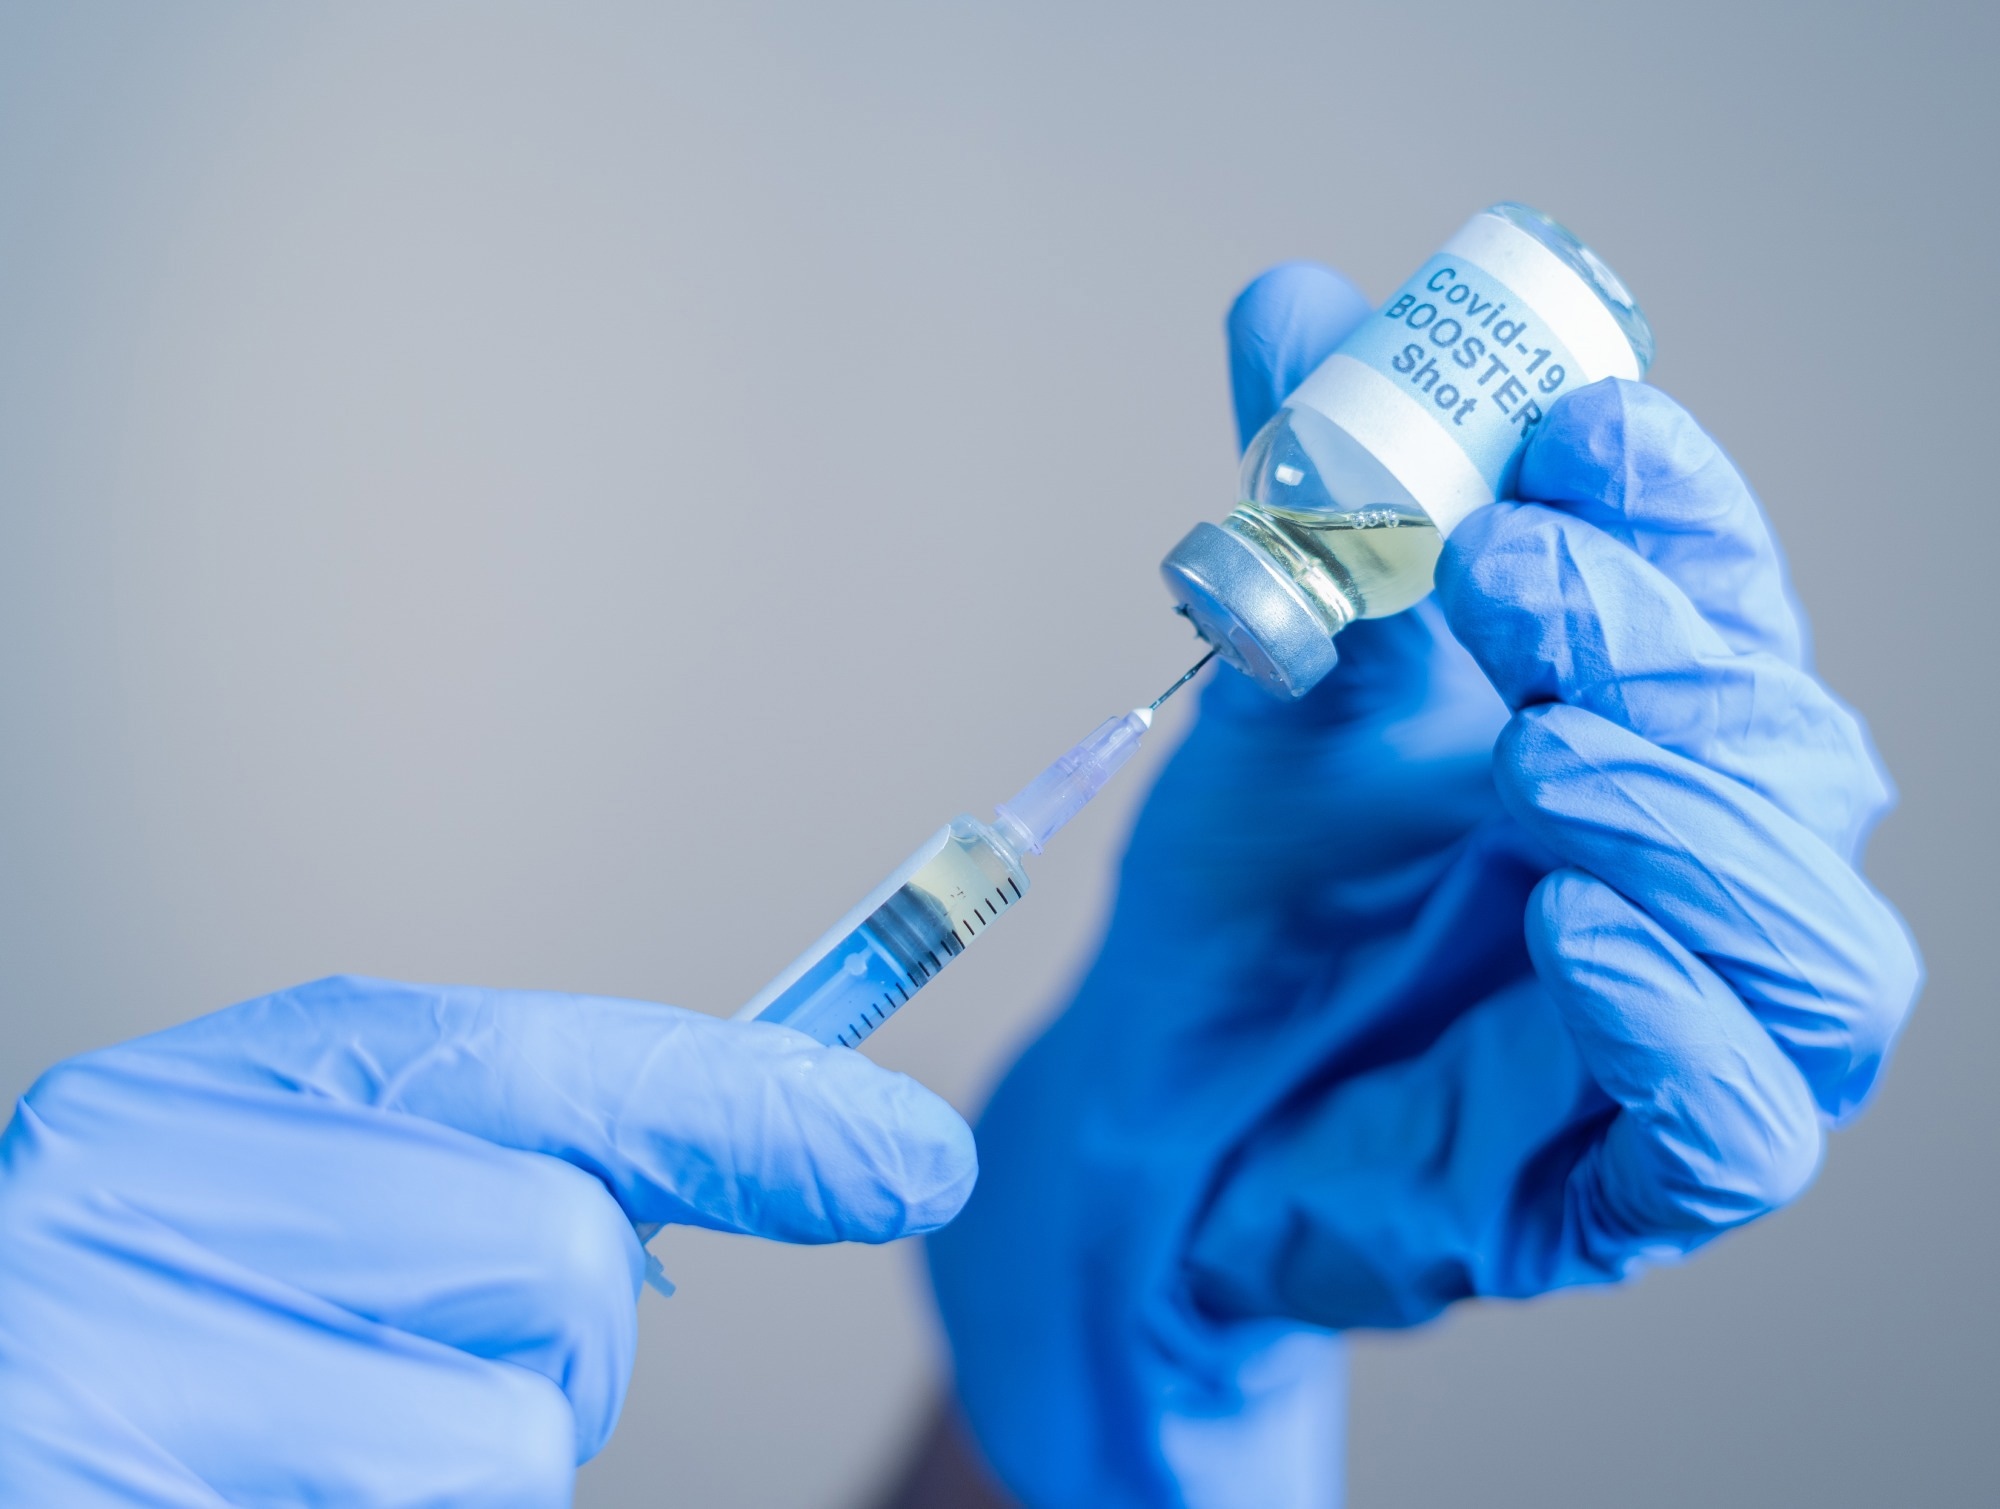 Study: Effectiveness of a bivalent mRNA vaccine booster dose to prevent severe COVID-19 outcomes: a retrospective cohort study. Image Credit: WESTOCKPRODUCTIONS/Shutterstock.com